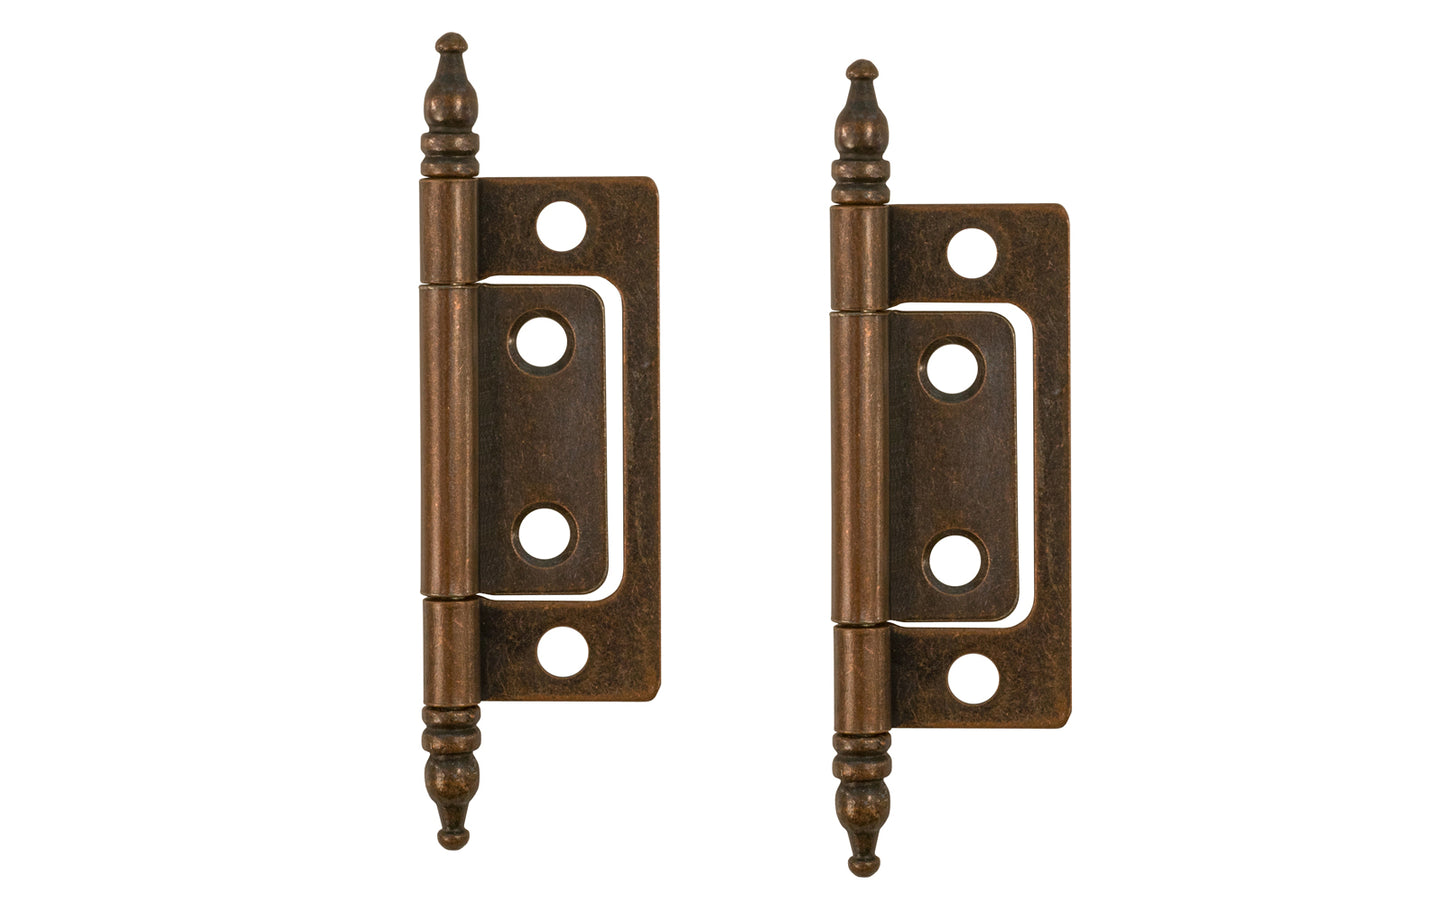 Traditional & classic 2" size non-mortise steeple-tip steel cabinet hinges. Surface mount & great for inset cabinet doors & bi-fold doors. These steeple tip finial hinges are designed in the early 20th century style / Arts and Crafts style of hardware. Antique copper finish on steel material. Two hinges in pack.